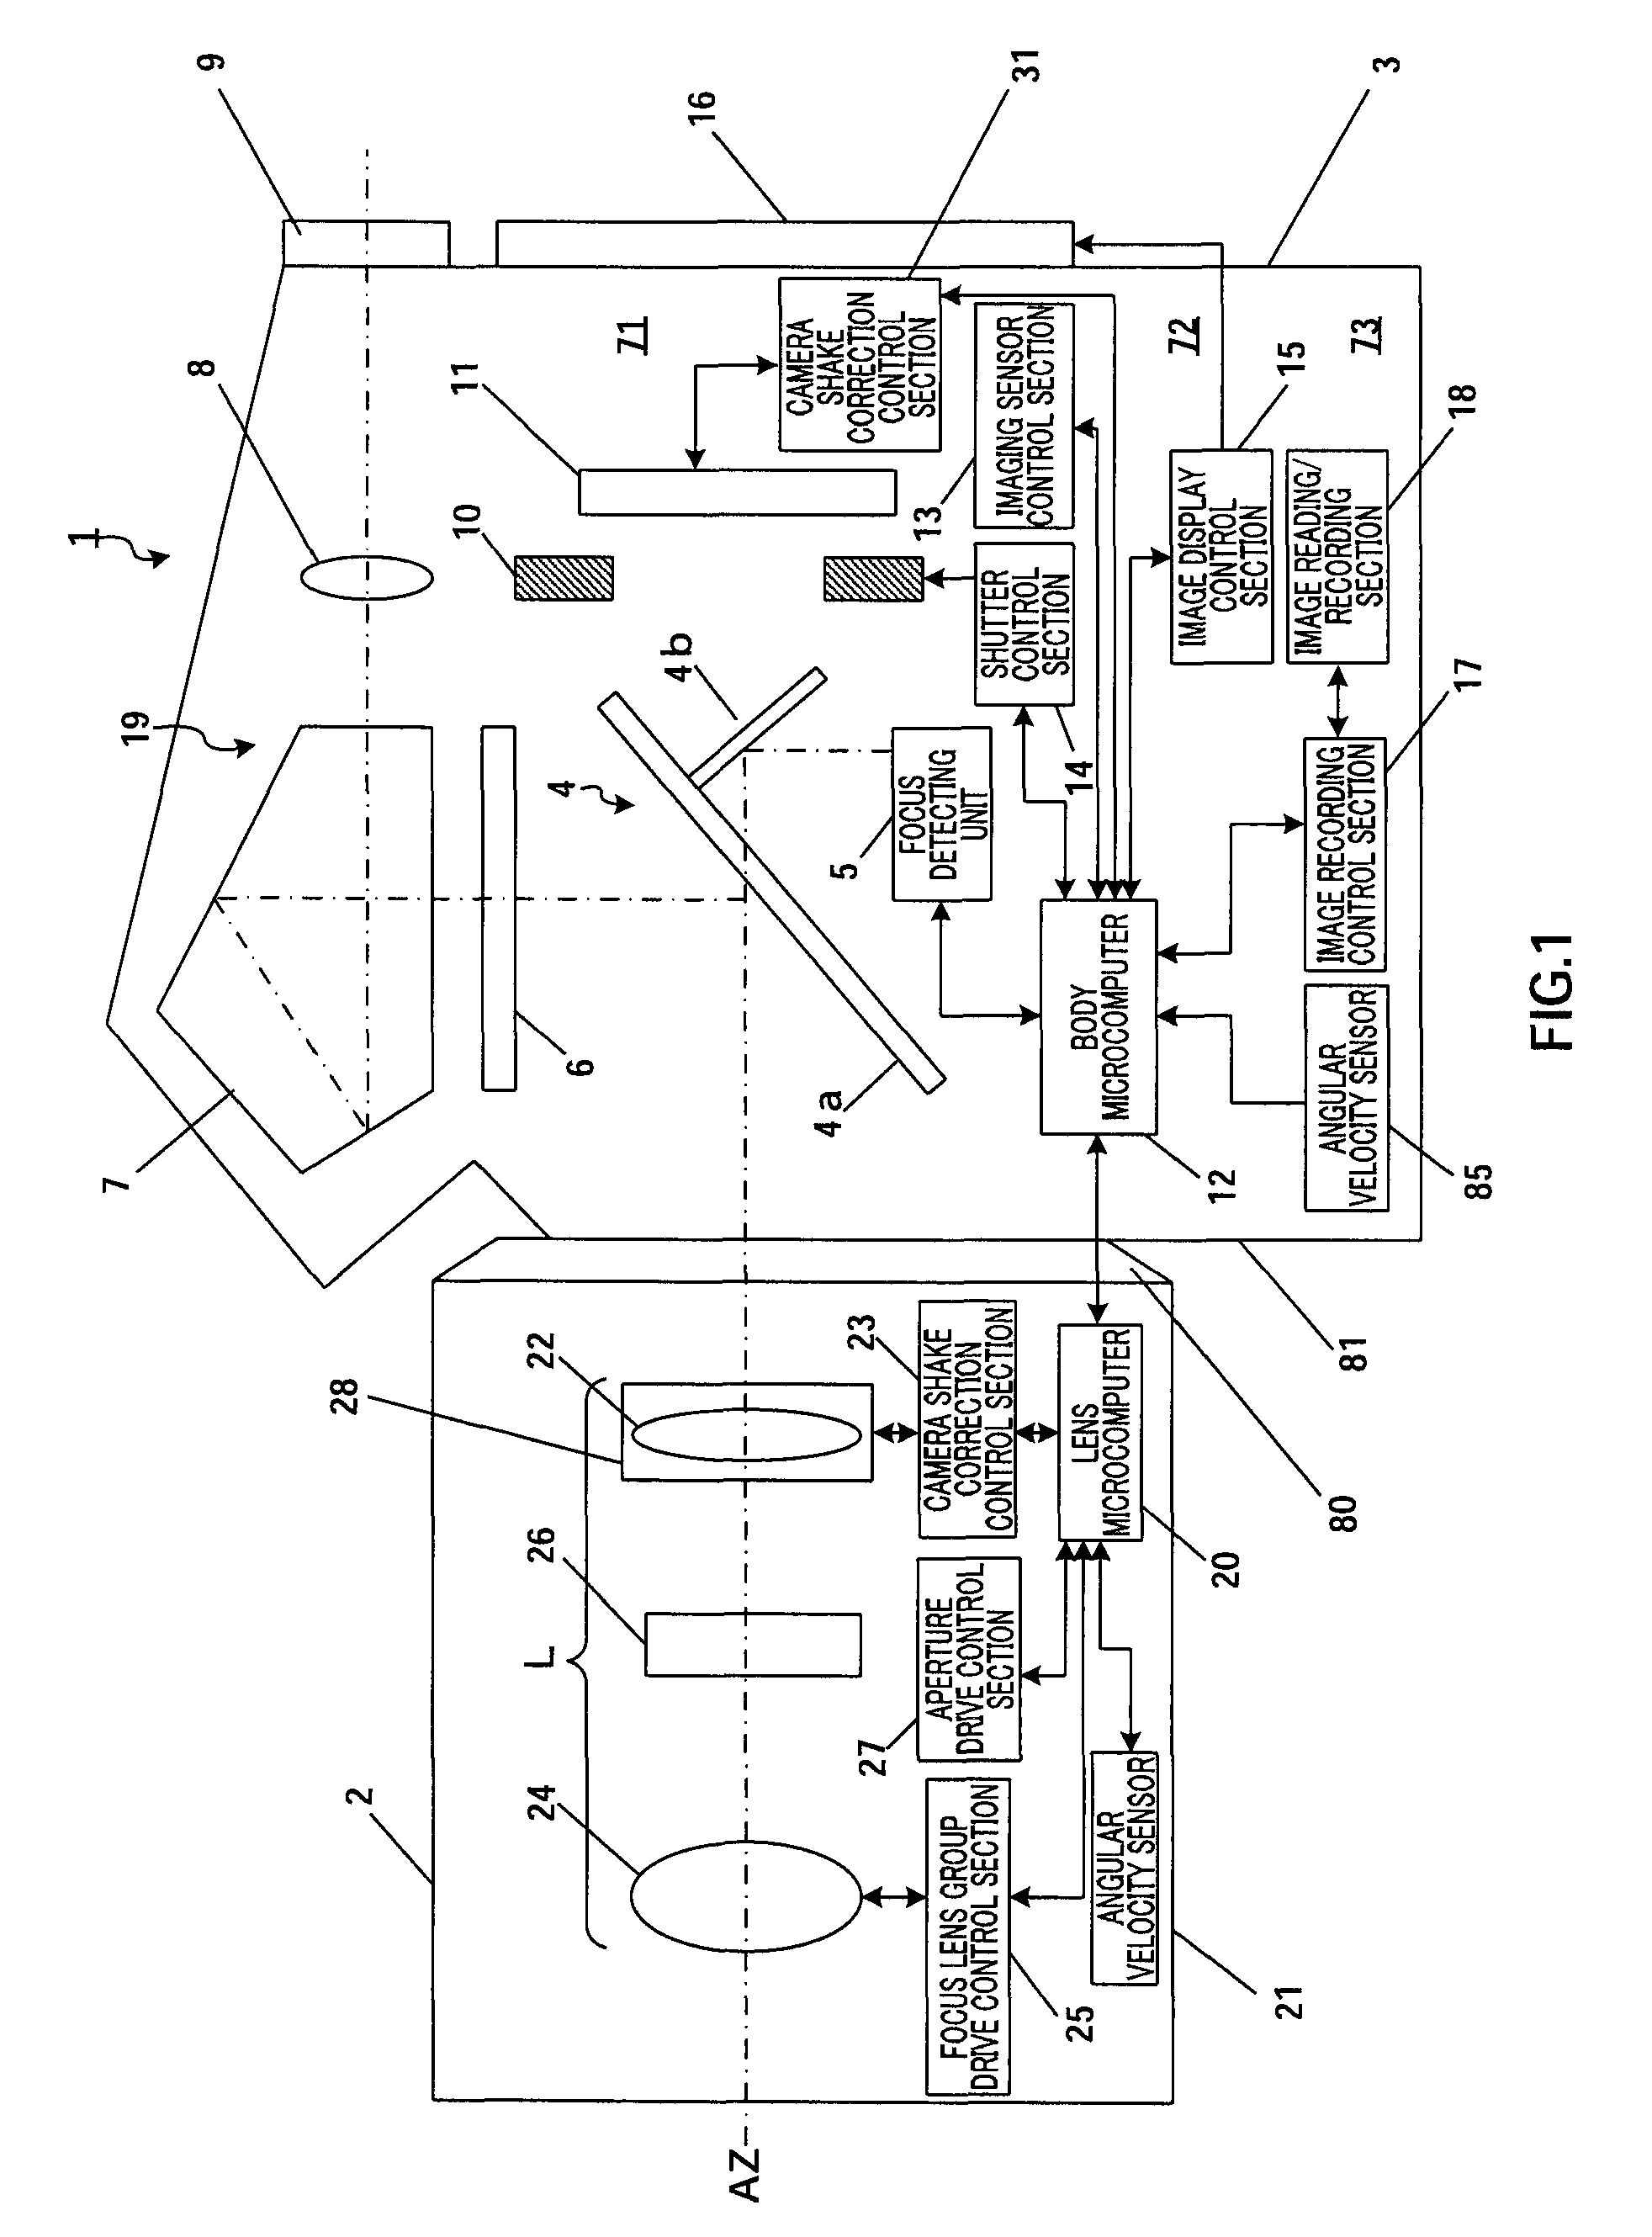 Digital single-lens reflex camera including control section that performs camera shake correction and motion detecting section that detects speed of subject